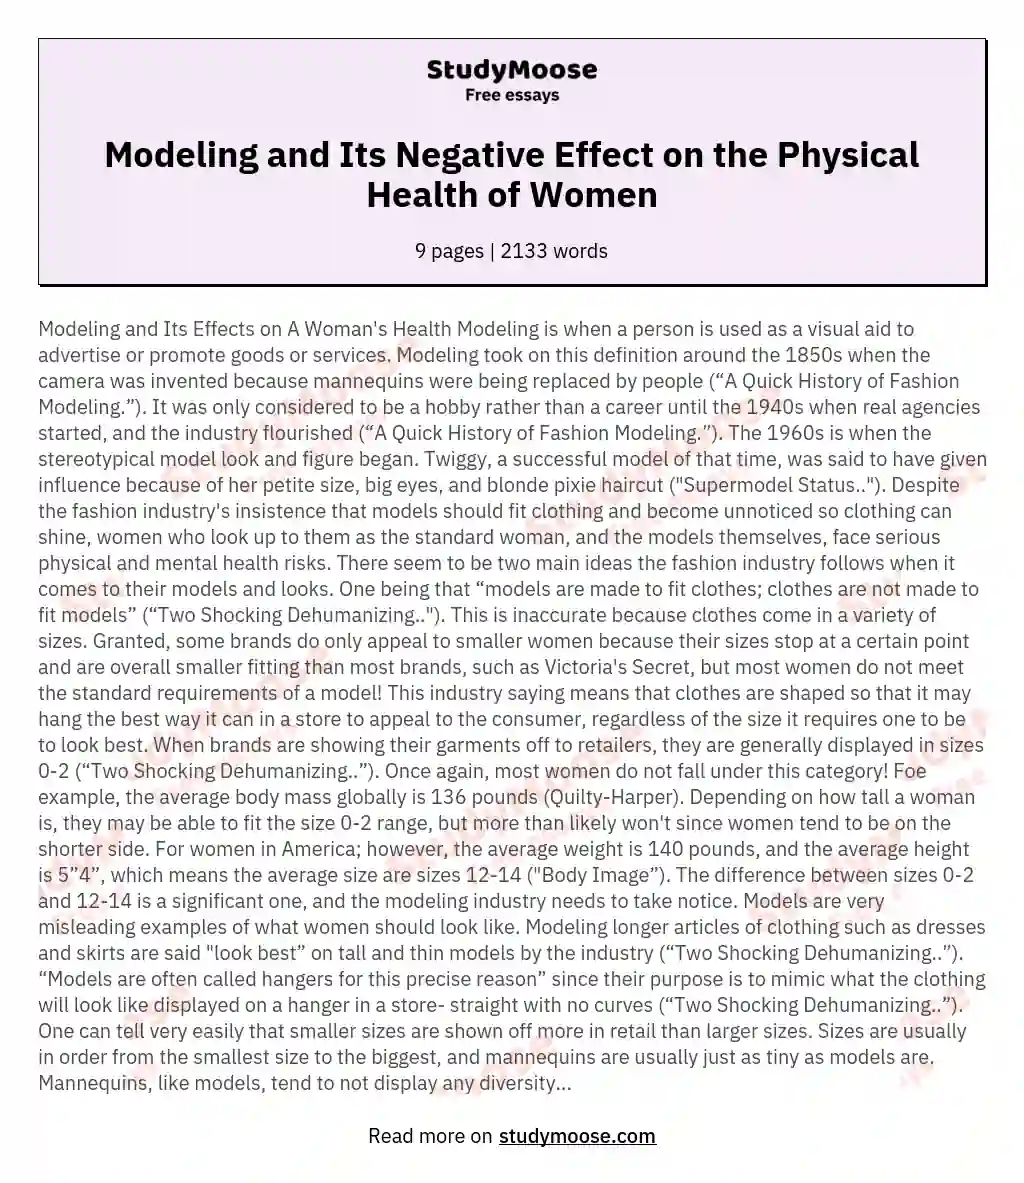 Modeling and Its Negative Effect on the Physical Health of Women essay